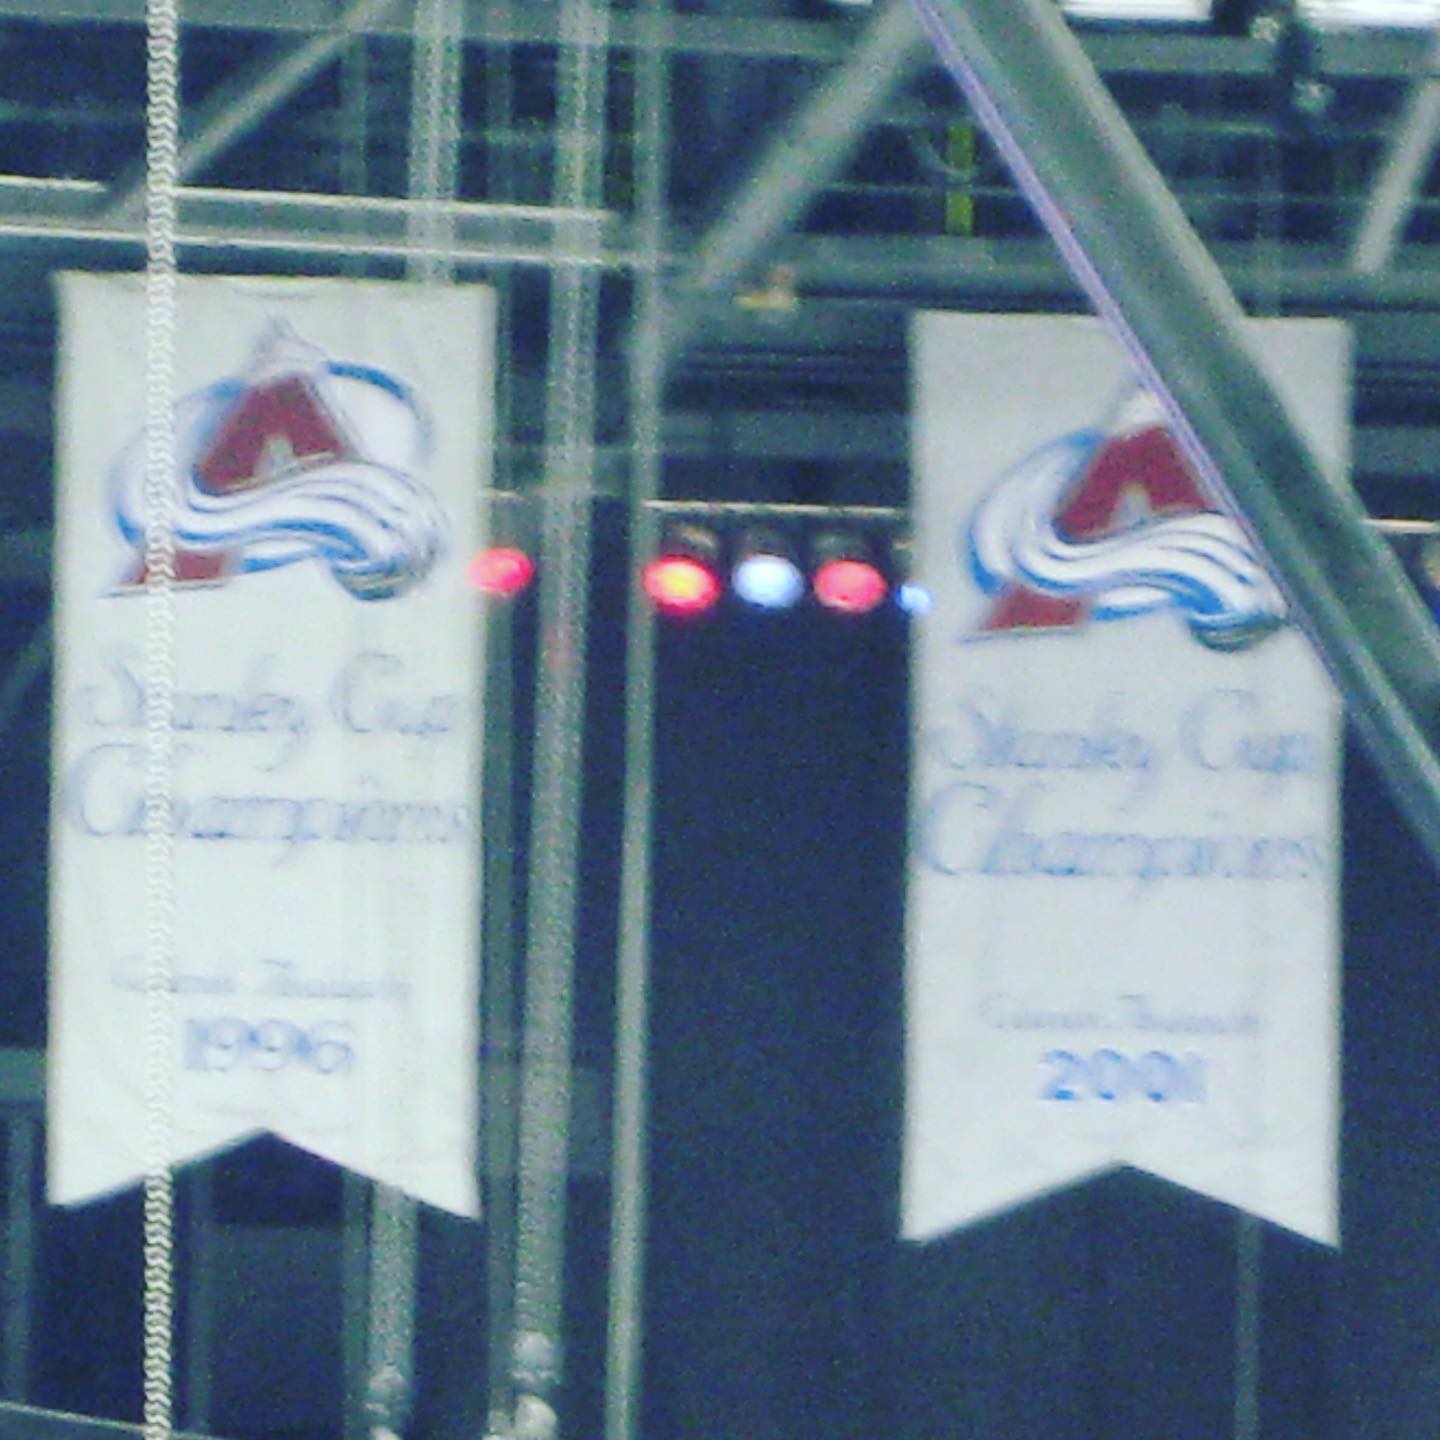 Congrats to the new Stanley Cup champion @coloradoavalanche! Here’s a faraway pic I took of their previous two championship banners during my last visit to what was then Pepsi Center. Hopefully I can take a trip out to Ball Arena next season to catch a glimpse of their new addition to the rafters.#avs #coloradoavalanche #denver #findaway #stanleycup #stanleycupfinal #becauseitsthecup #colorado #nhl #ballarena #sportstravel #sportstourism